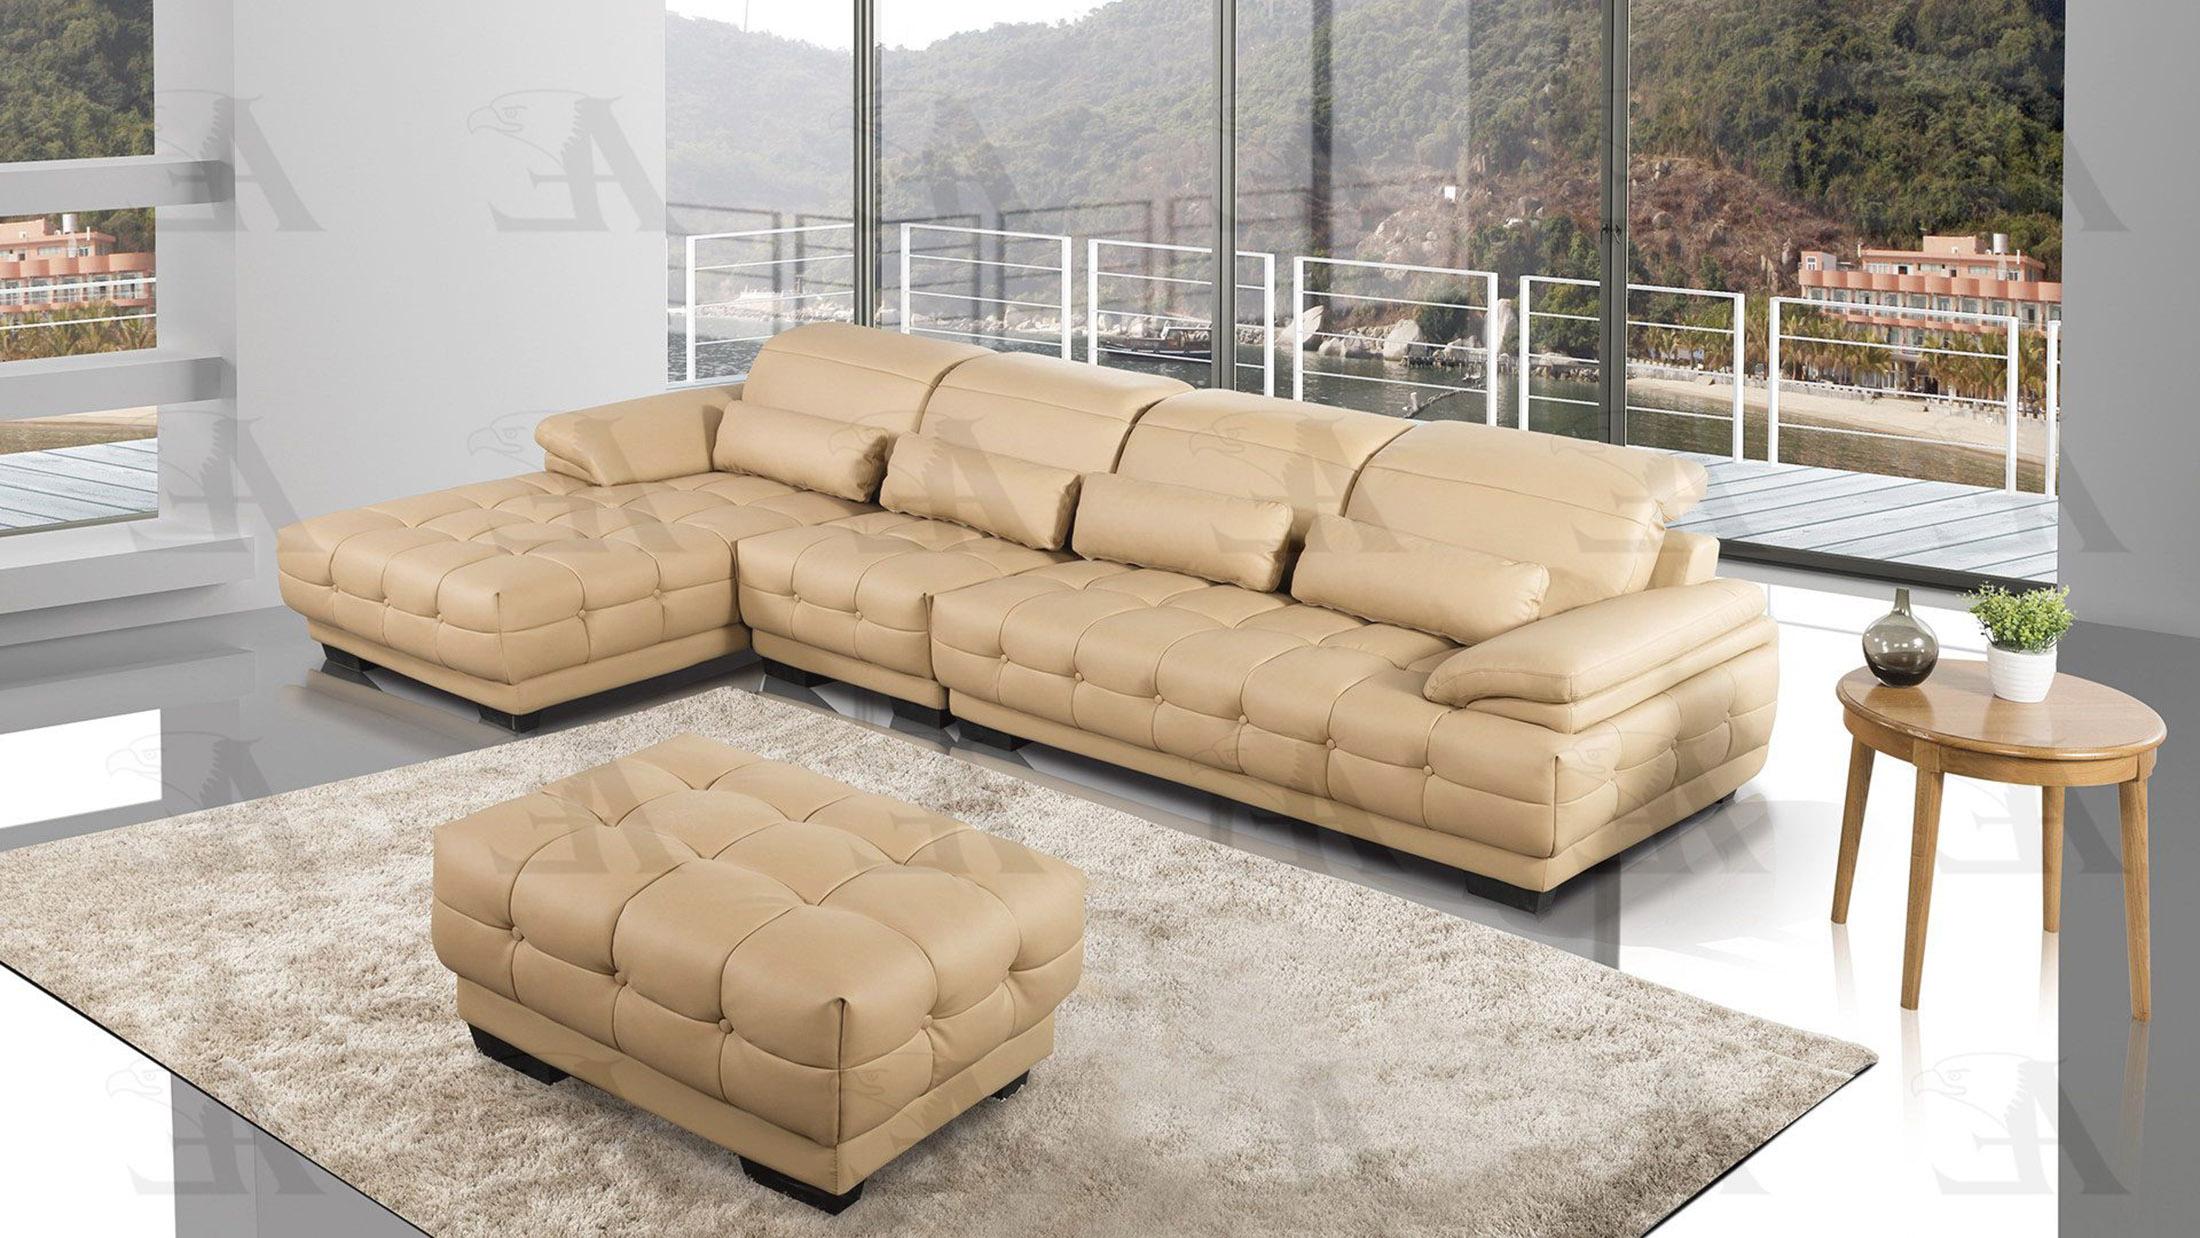 Modern Sofa Chaise Chair and Ottoman Set AE-L296-BK AE-L296-CA Set-4 LHC in Tan Bonded Leather